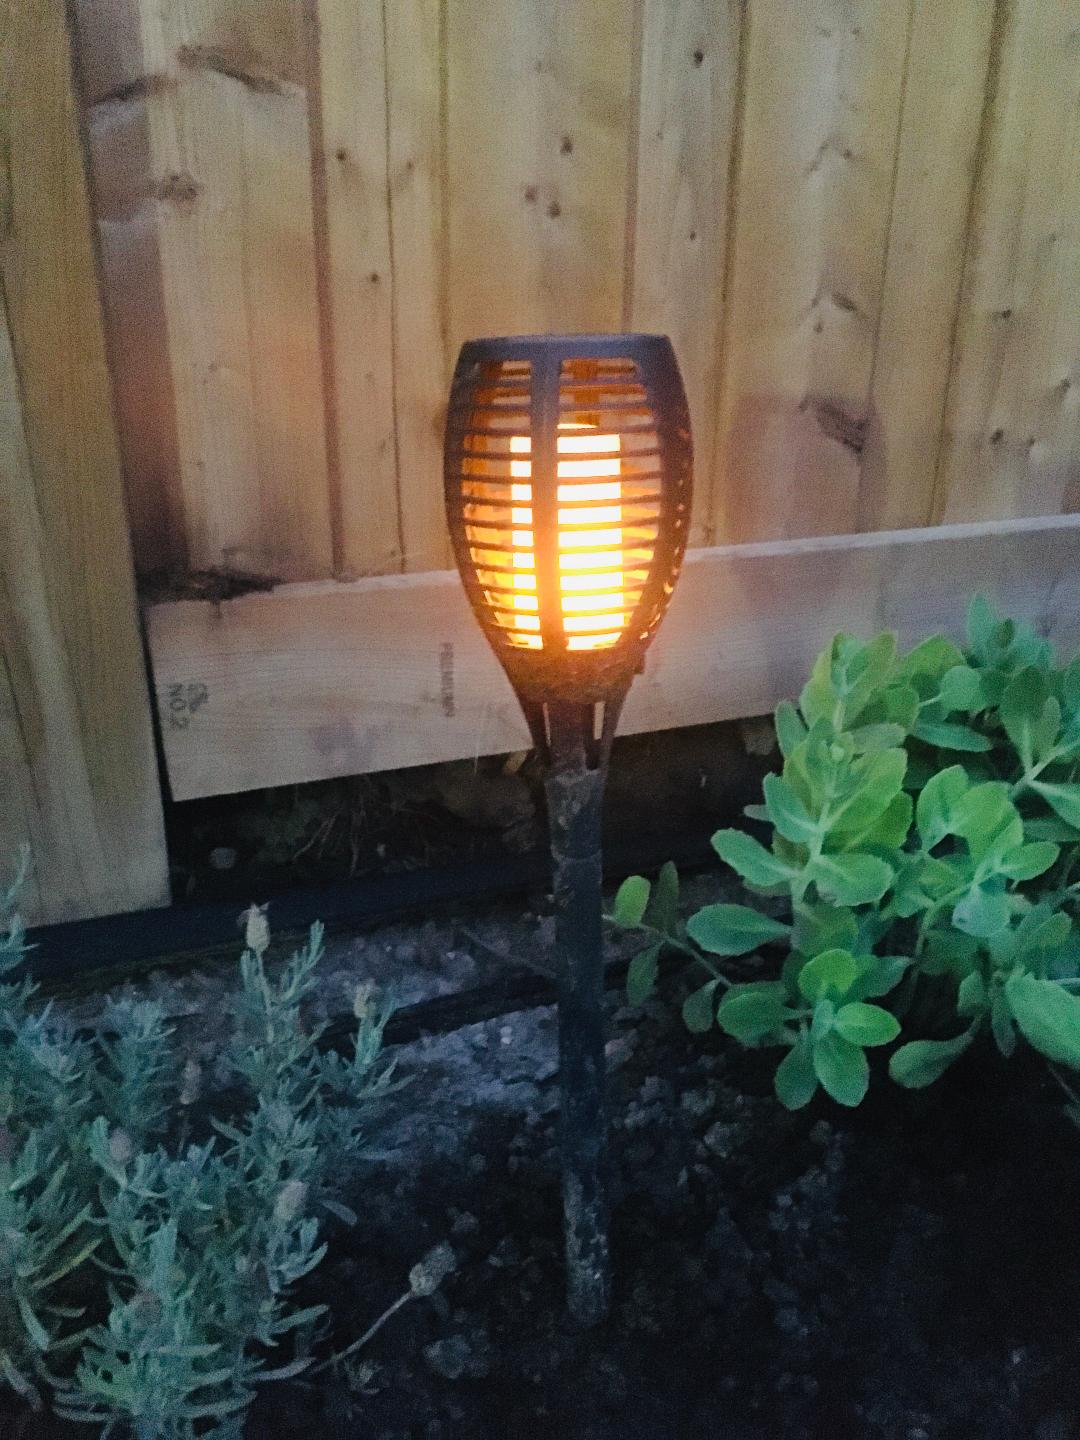 BigM LED Solar Powered Flickering Flame Lights is turn on at night in a garden